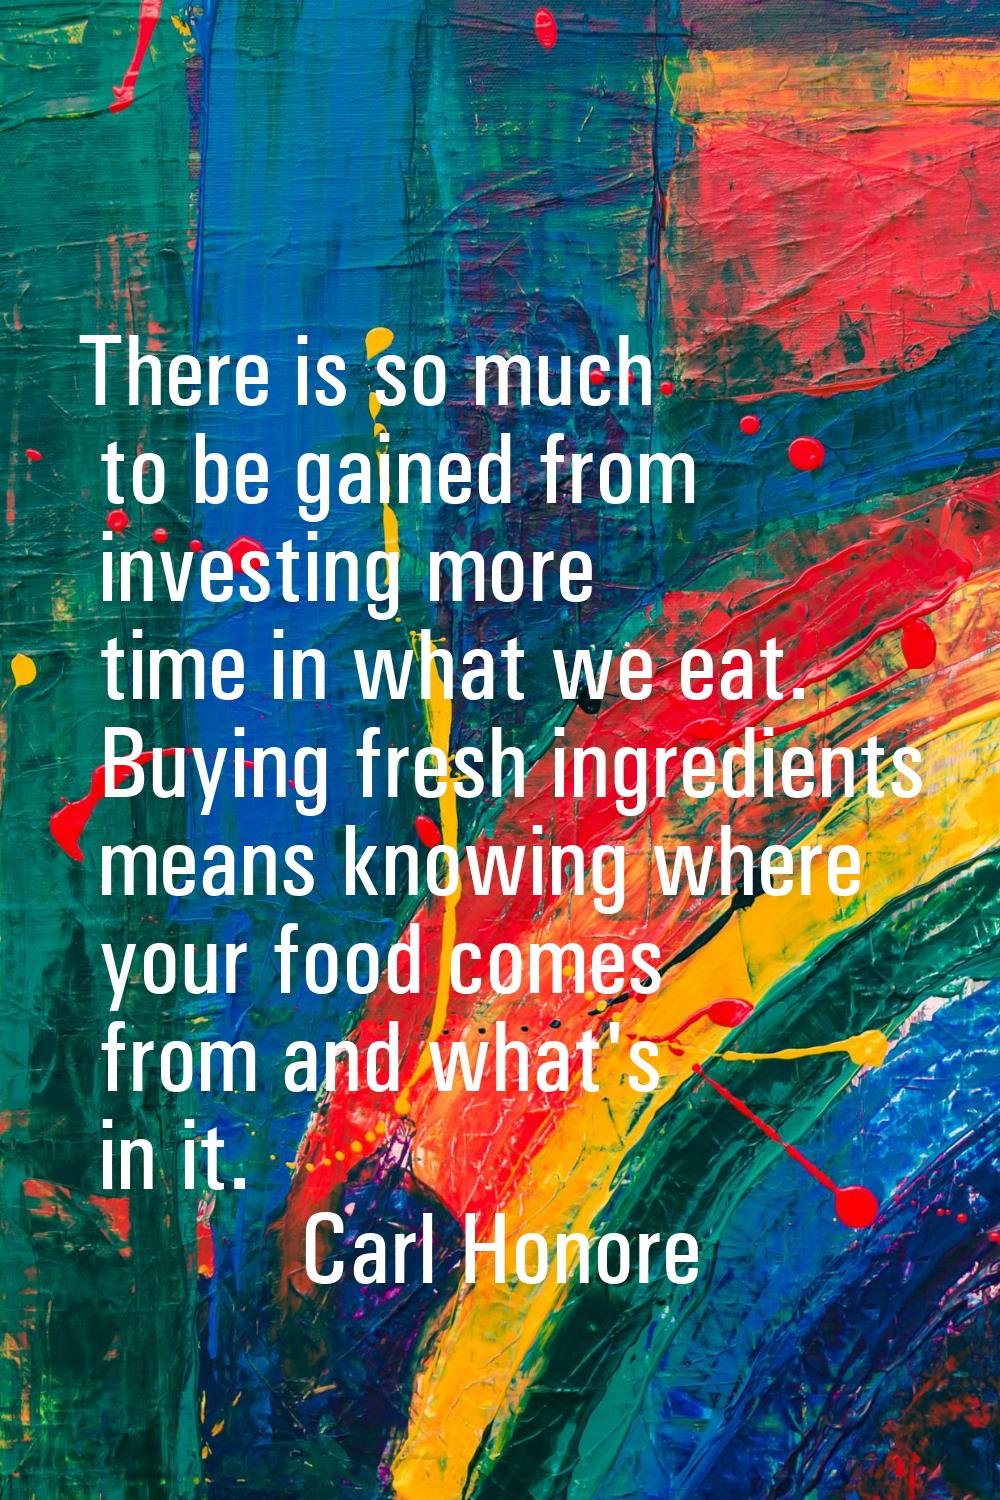 There is so much to be gained from investing more time in what we eat. Buying fresh ingredients mea